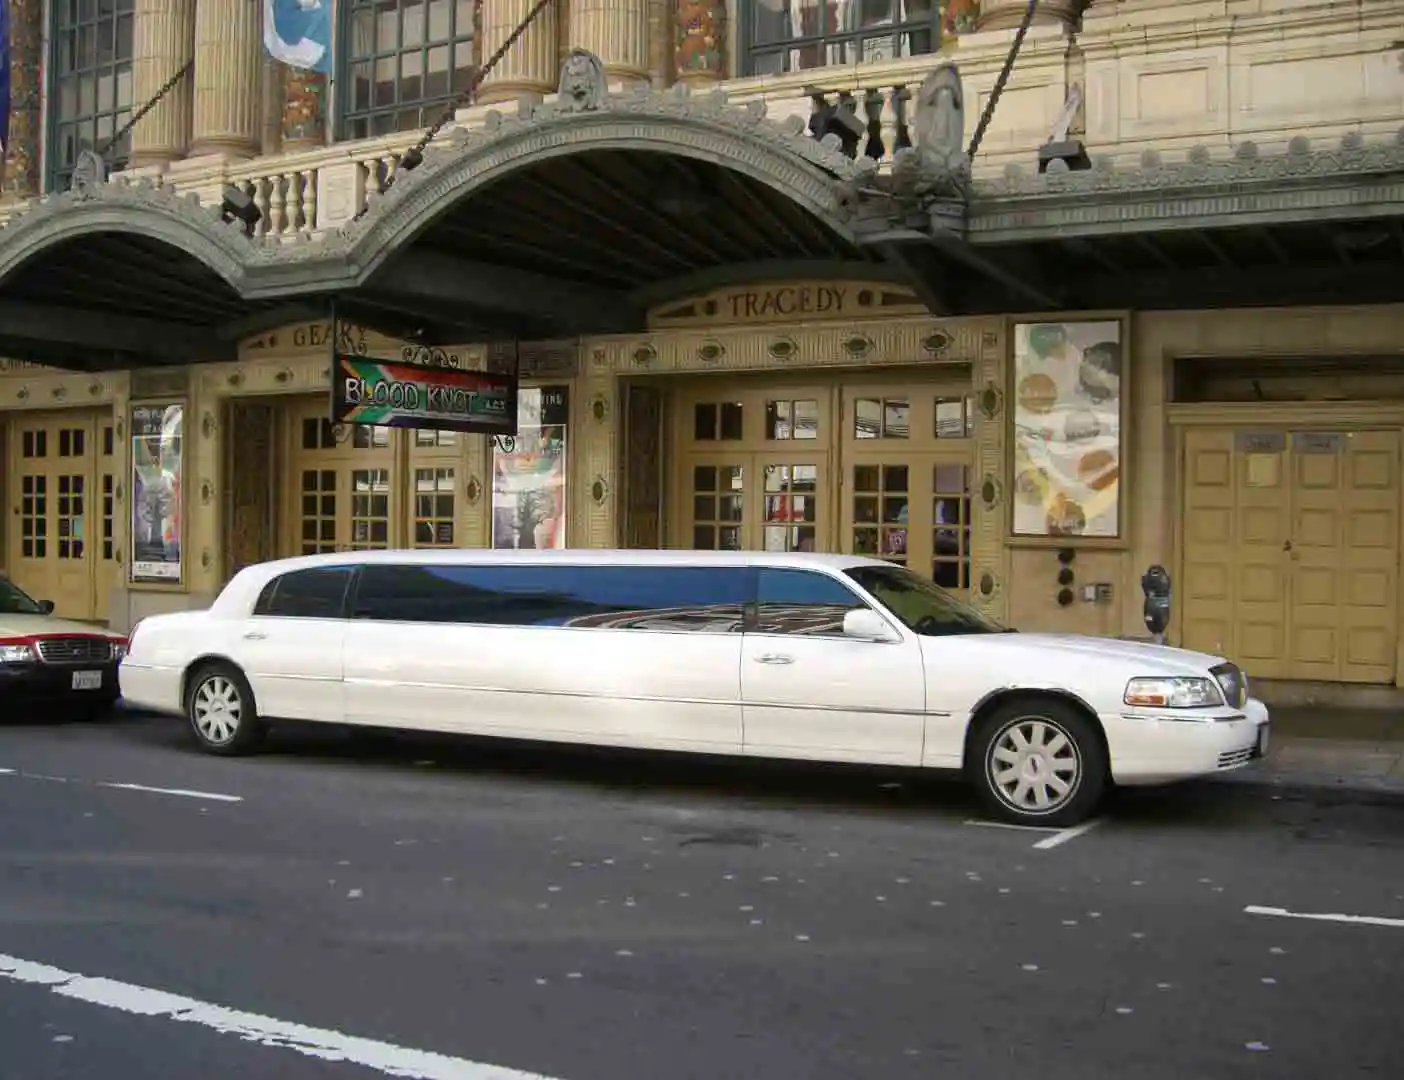 limousine-car-price-in-pakistan-specs-features-and-models